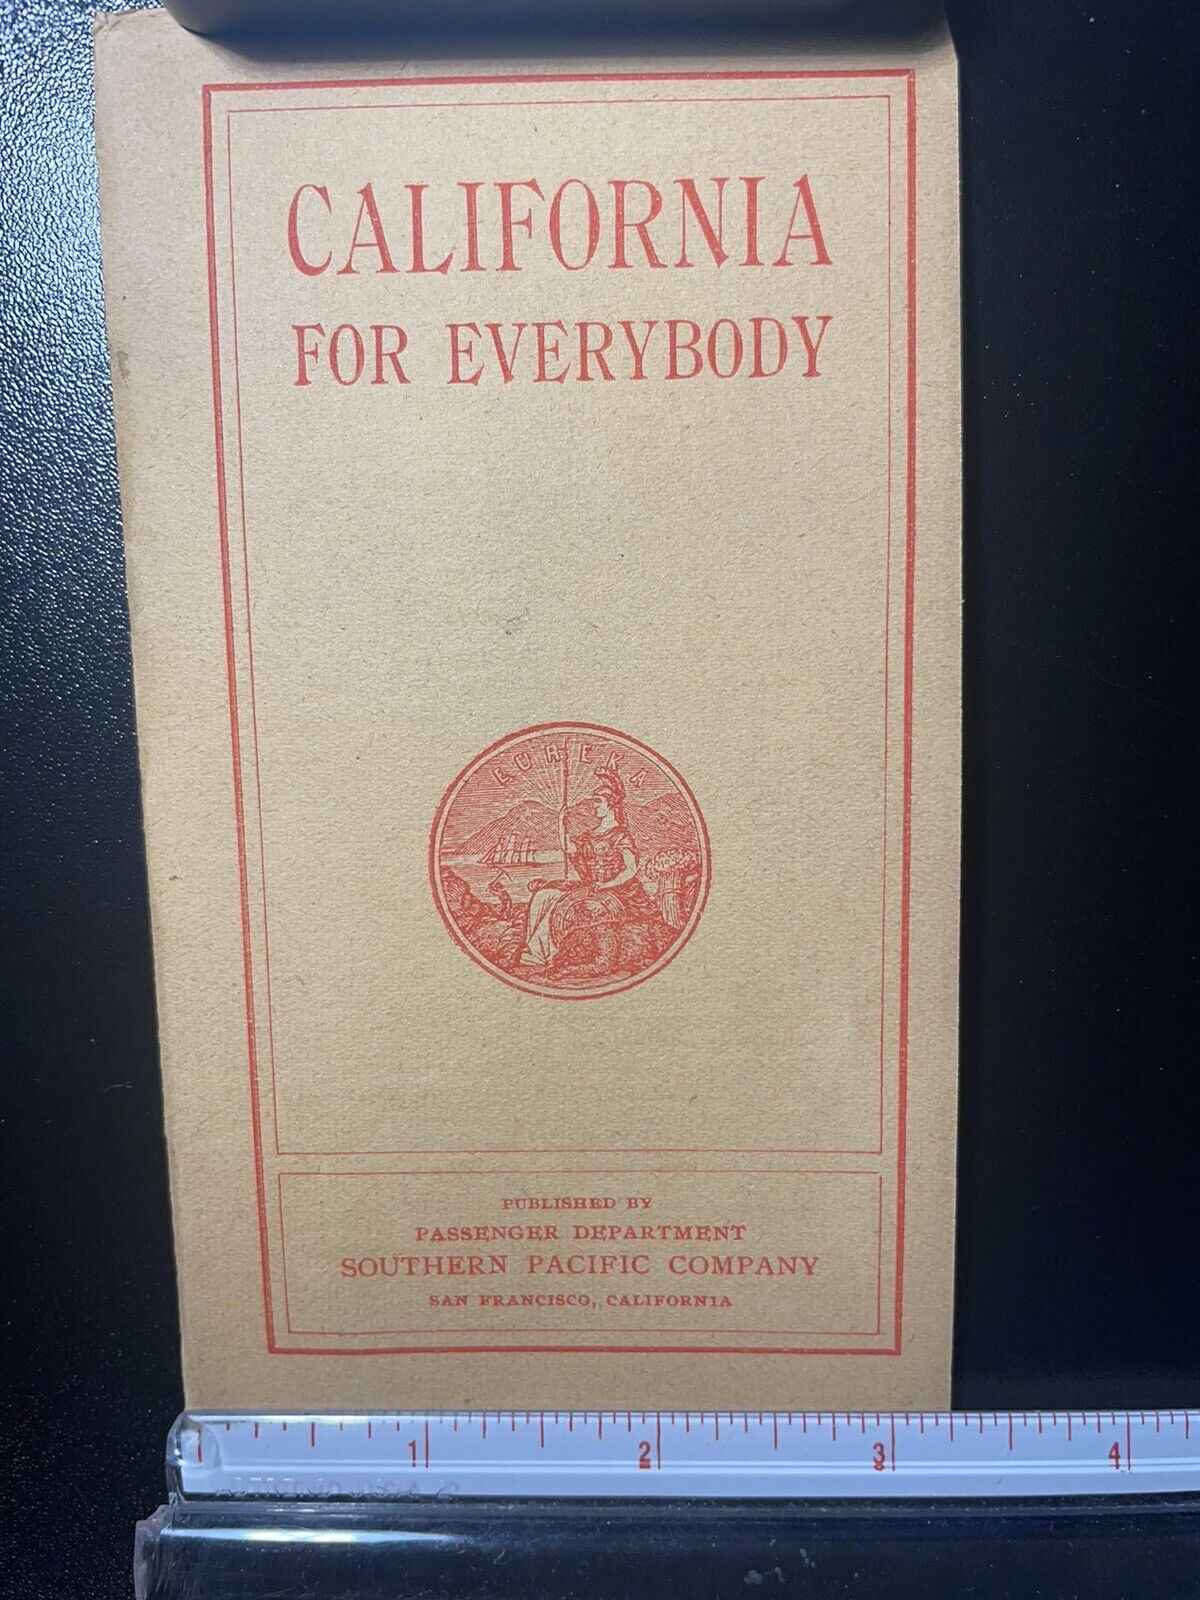 1903 Vintage Booklet Titled California for Everyone